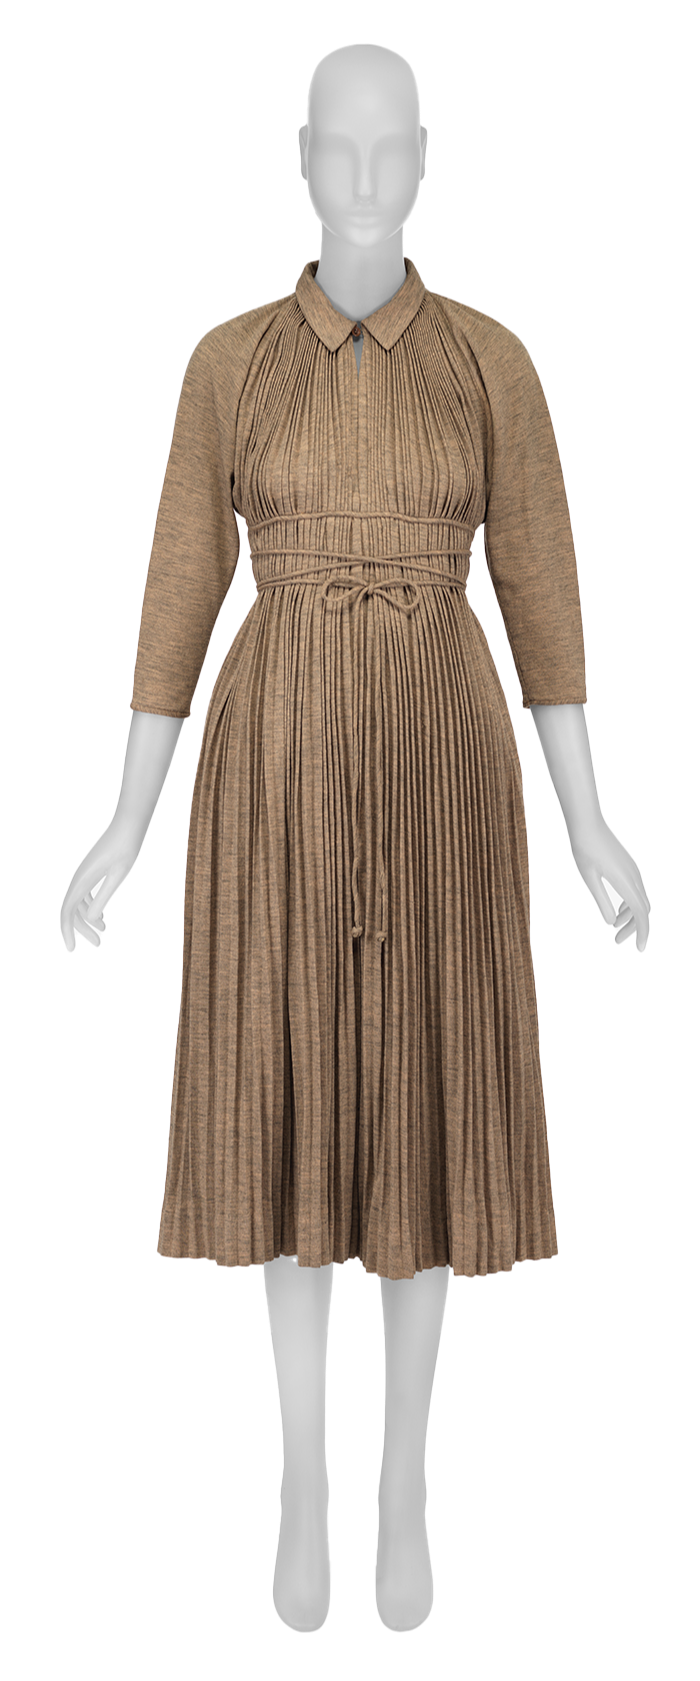 A golden brown pleated dress with a tie at the waist